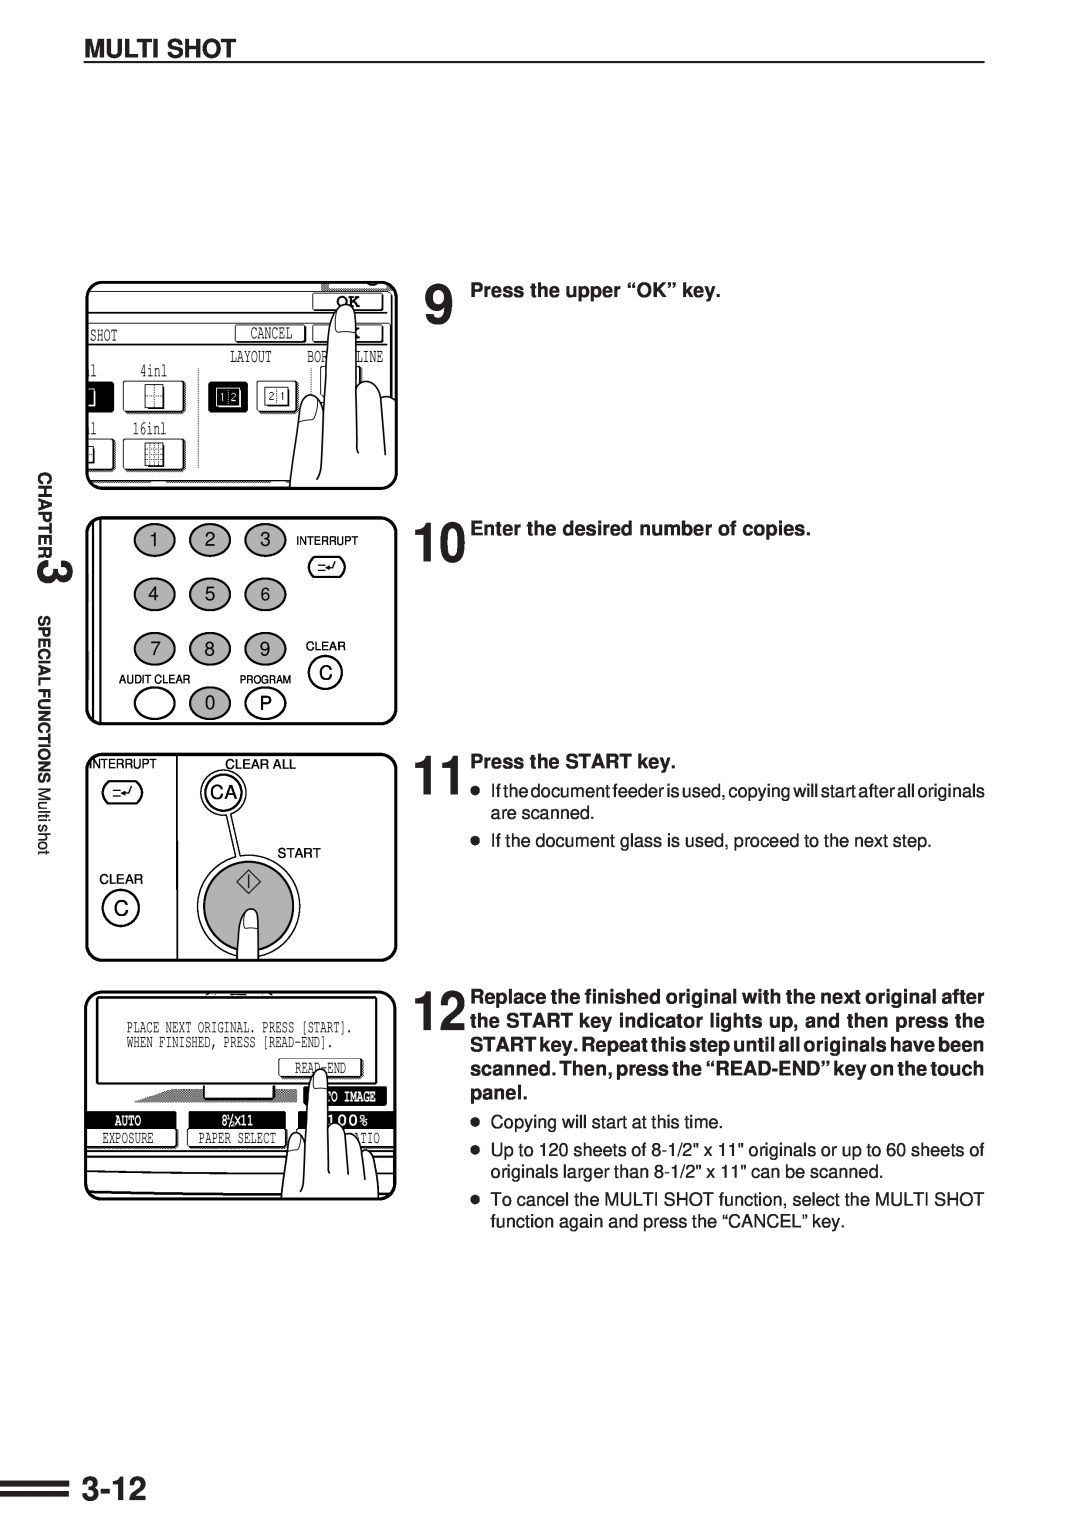 Sharp AR-287 manual 3-12, Press the START key, Replace the finished original with the next original after 